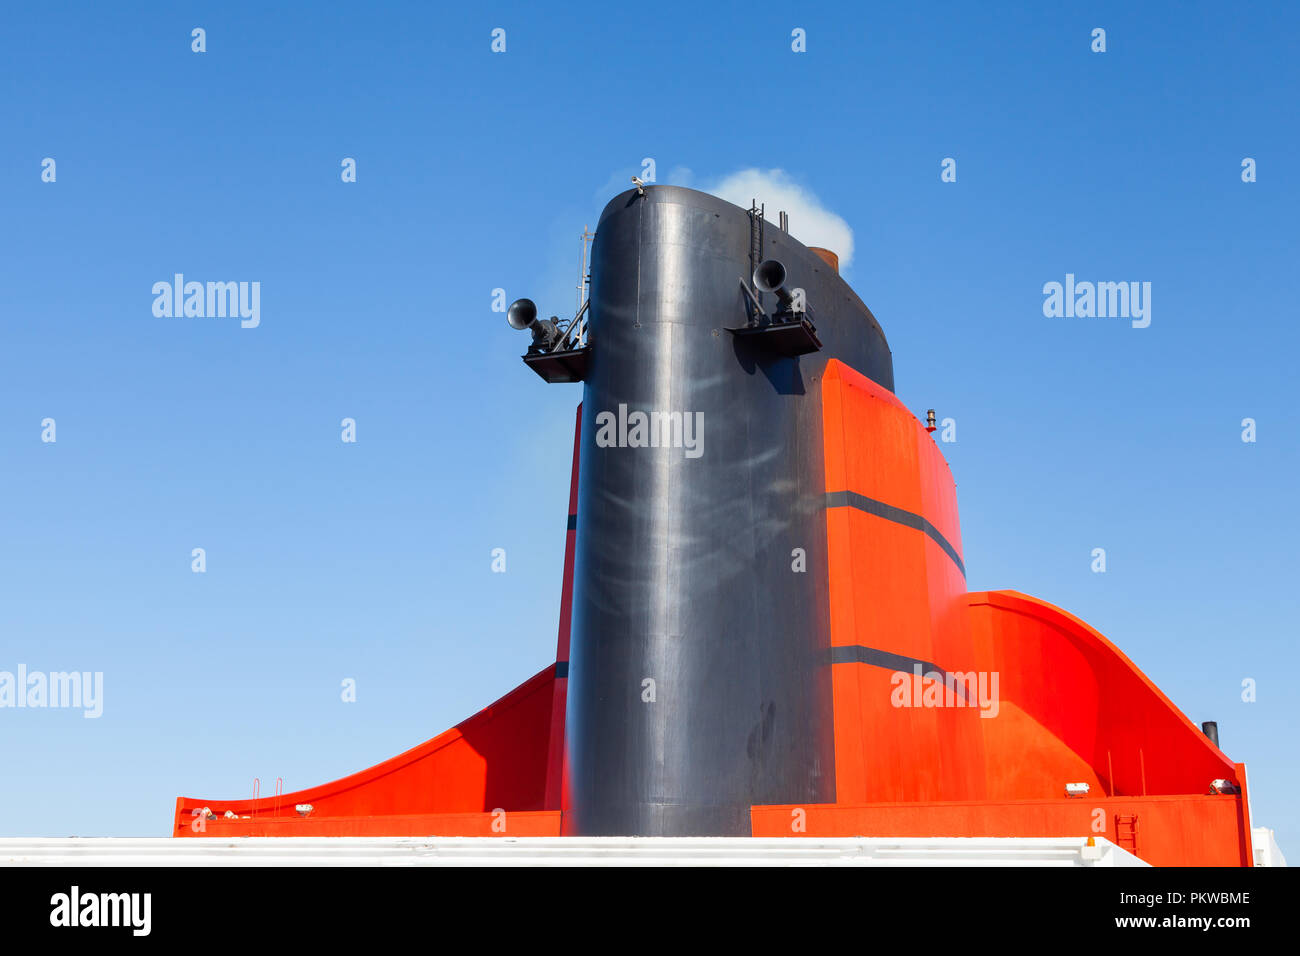 The funnel of the Cunard cruise liner Queen Mary 2 is pictured in the North Atlantic Ocean.  Cunard Line is part of the Carnival Corporation. Stock Photo